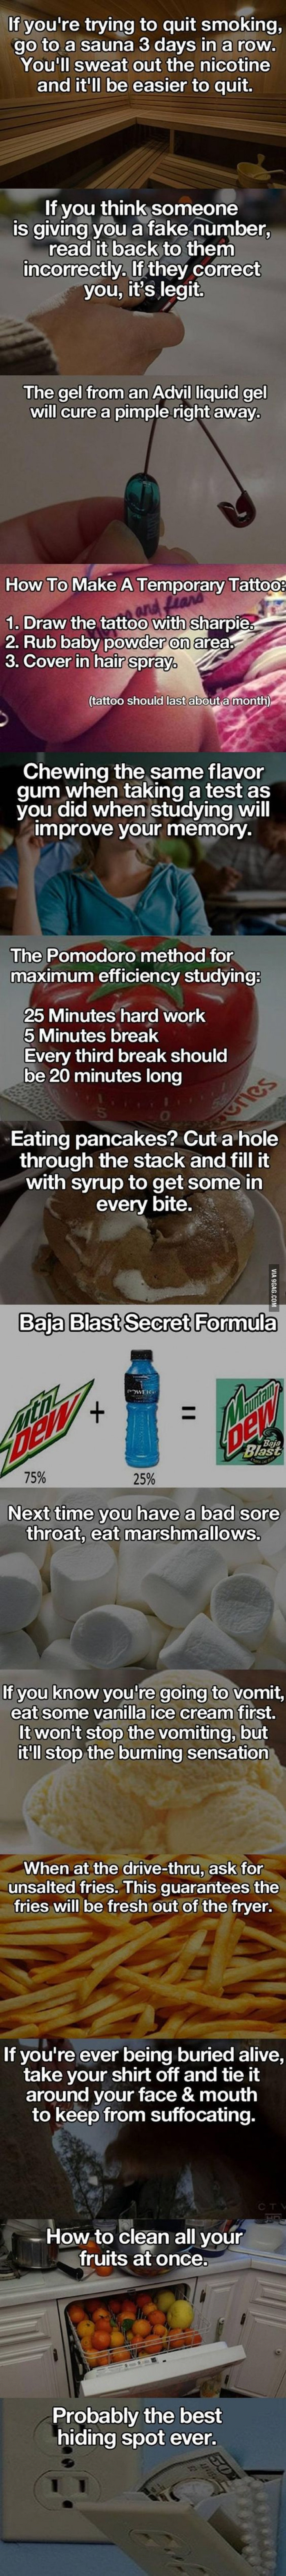 These Life Hacks Will Make Your Life Ten Times Easier